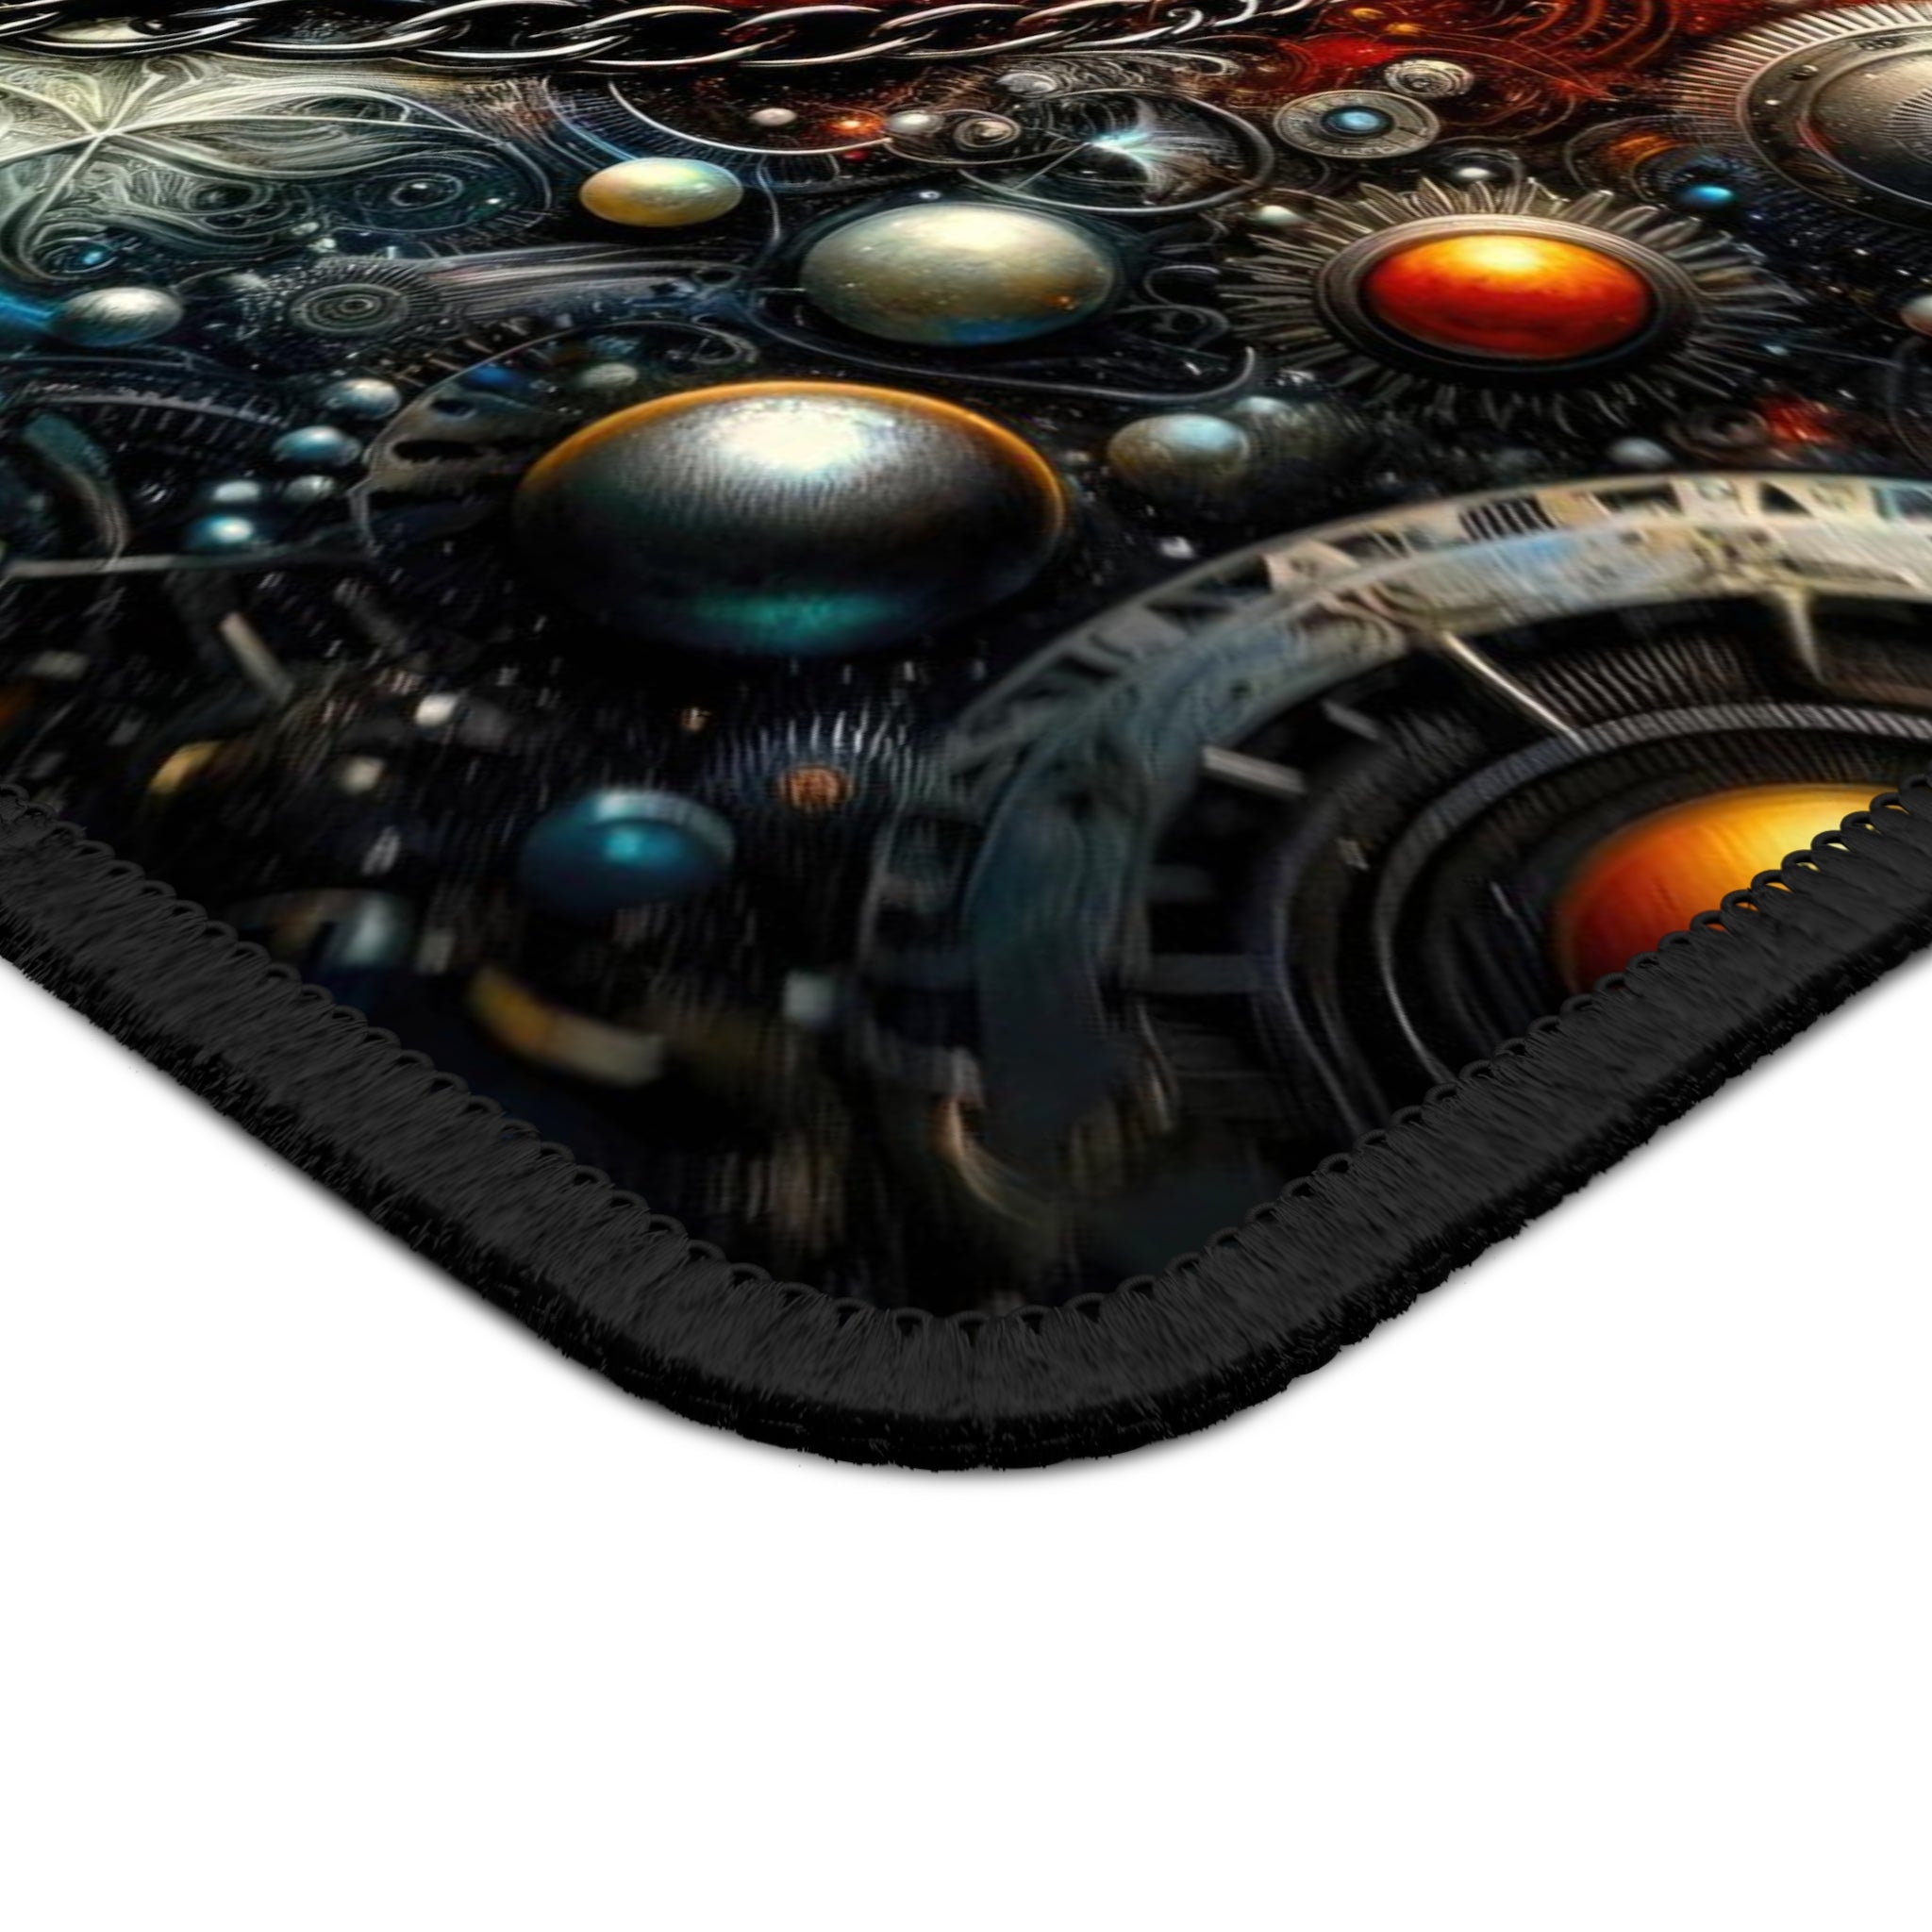 A Canine Constellation Gaming Mouse Pad